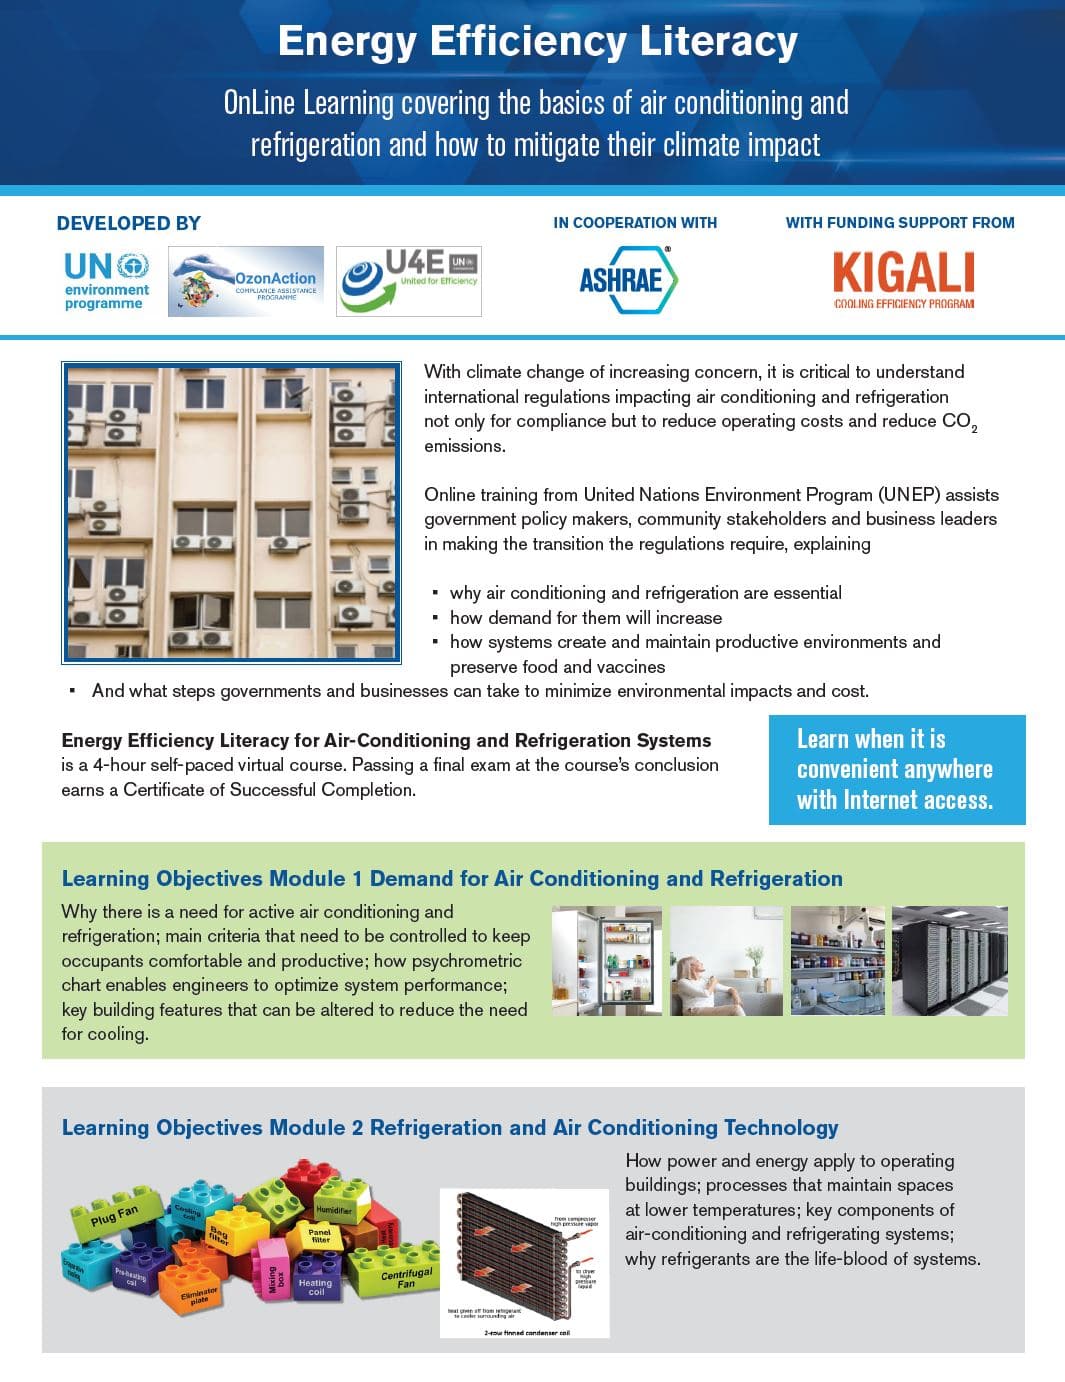 E-learning Course on Energy-Efficient Refrigerators and Air Conditioners flyer cover